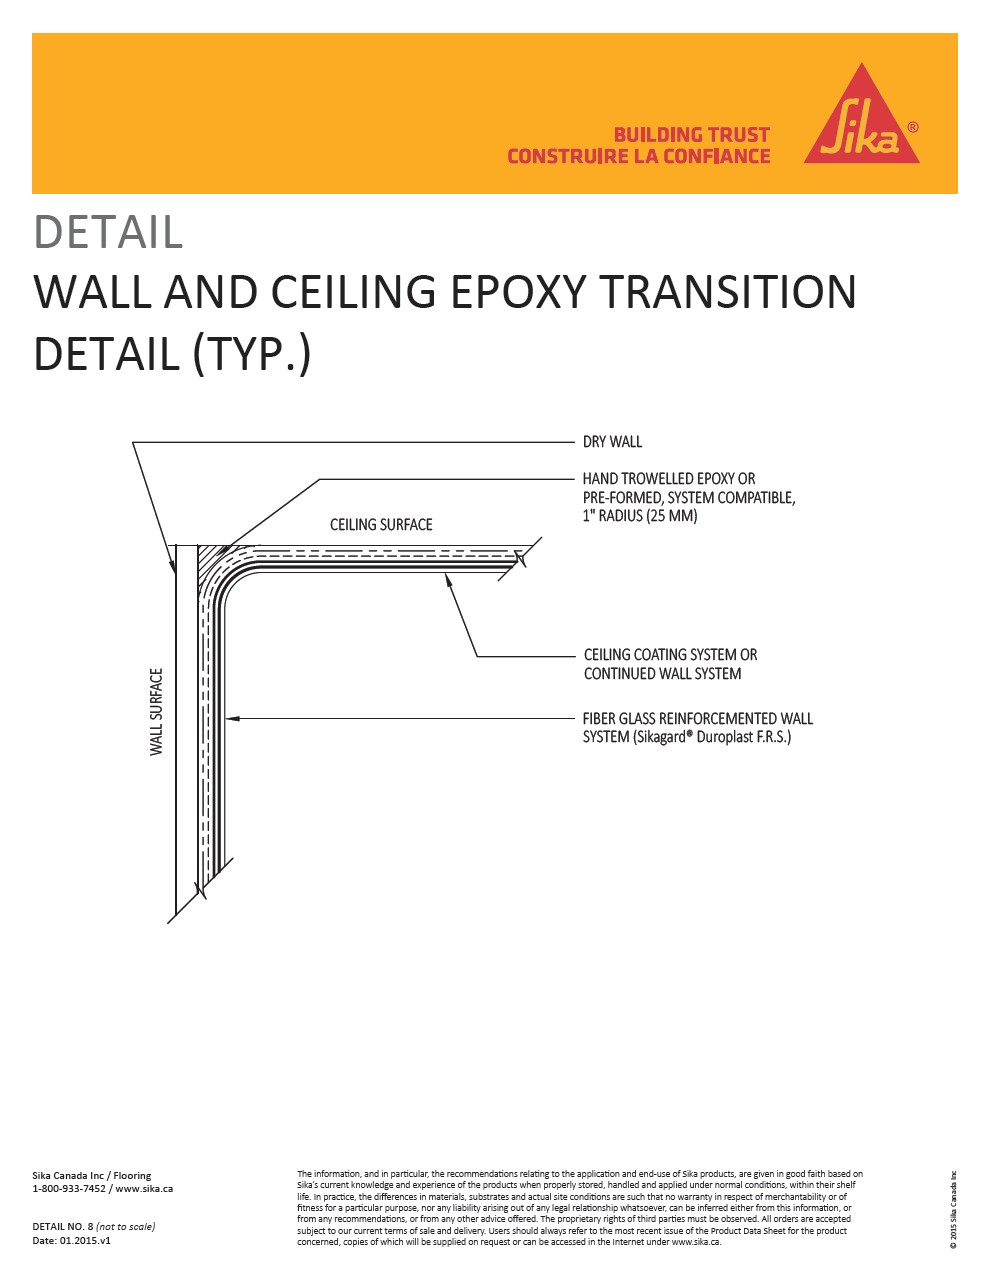 8-Wall and Ceiling Epoxy Transition 